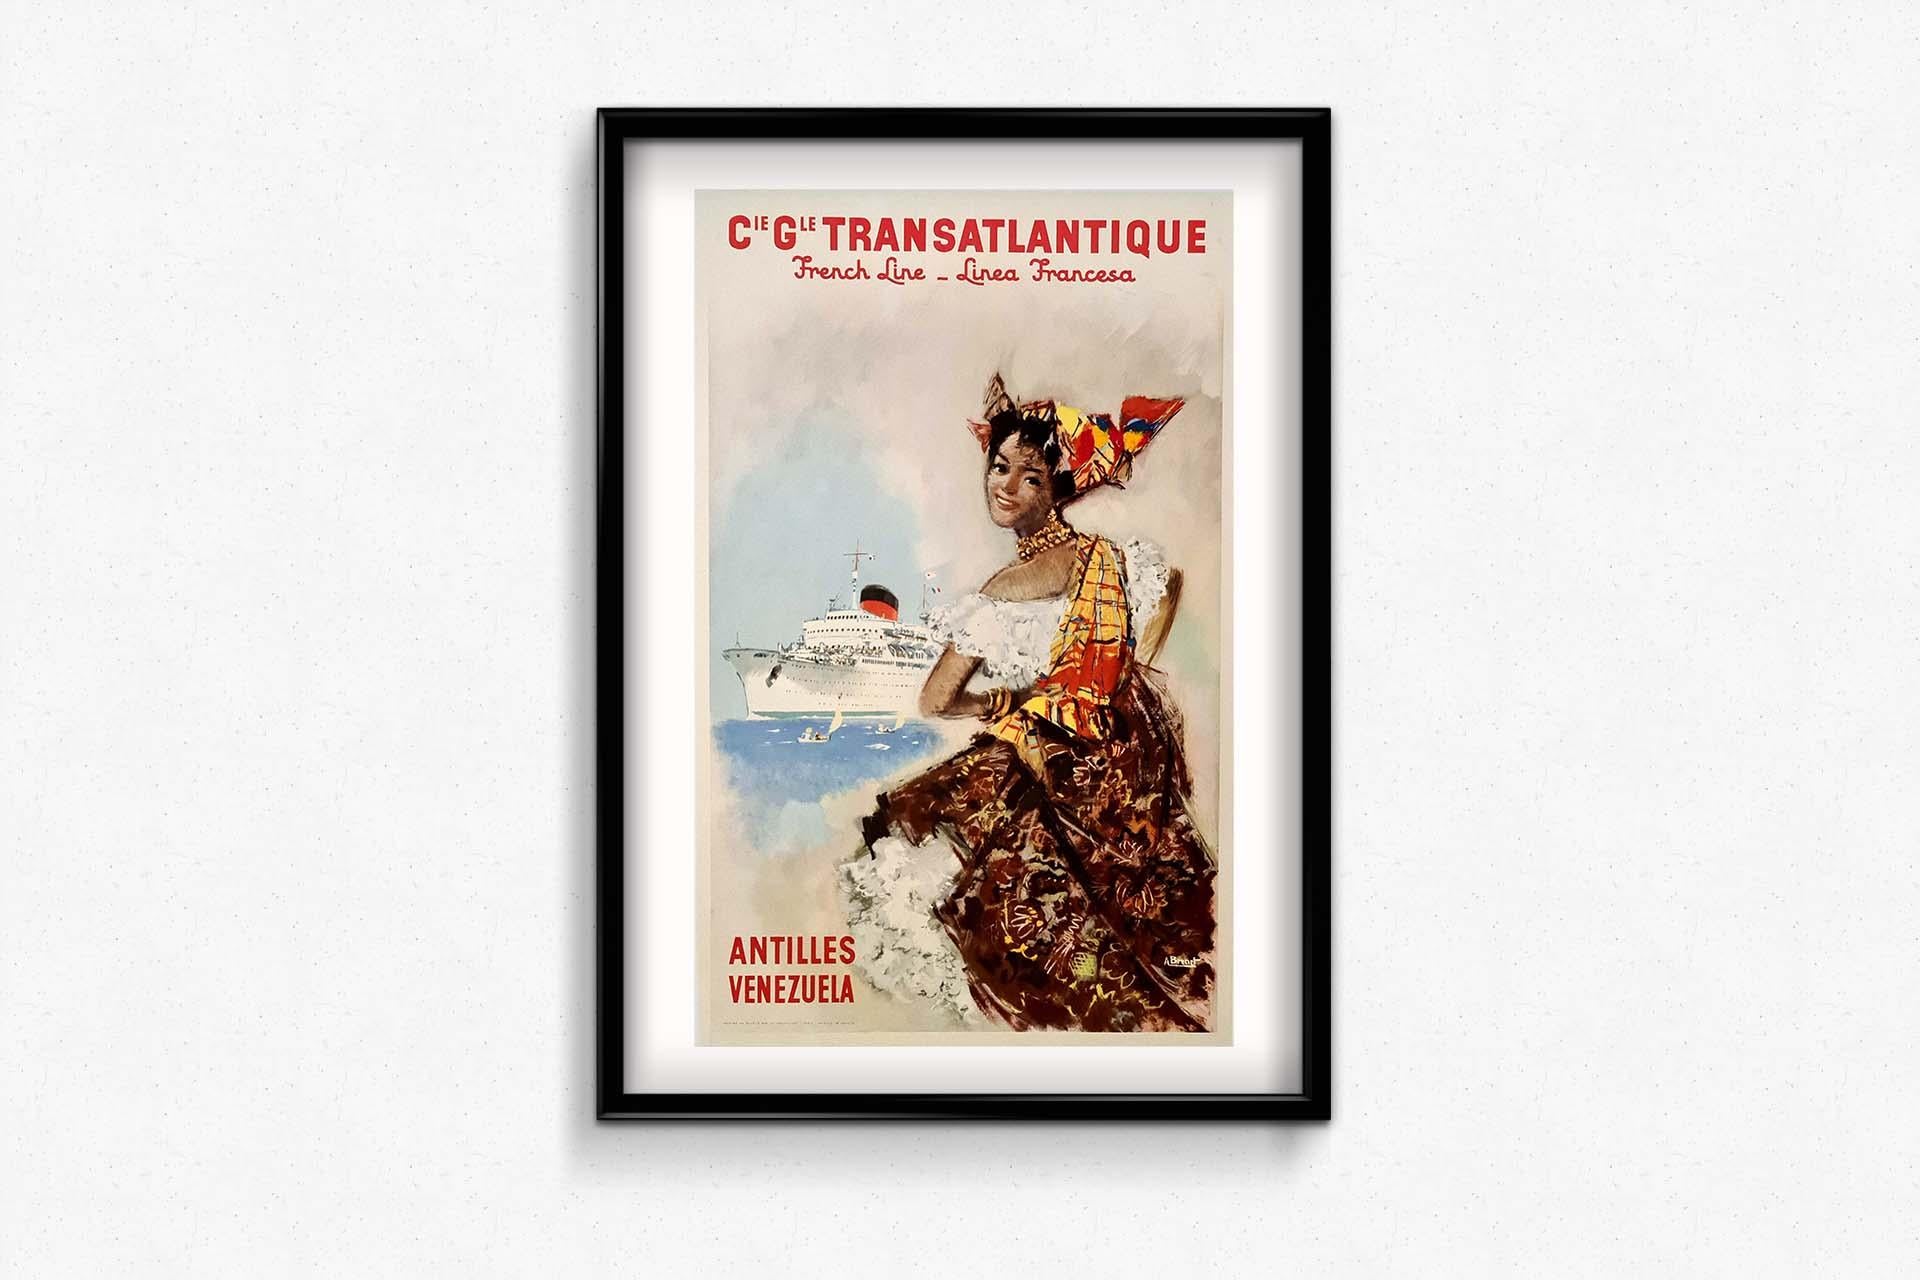 Nice poster made around 1950 by Albert Brenet 🇫🇷 (1903-2005), a famous French painter, poster artist, sculptor and illustrator : Compagnie Générale Transatlantique French line - Antilles - Venezuela - Linea francesa

He was notably appointed